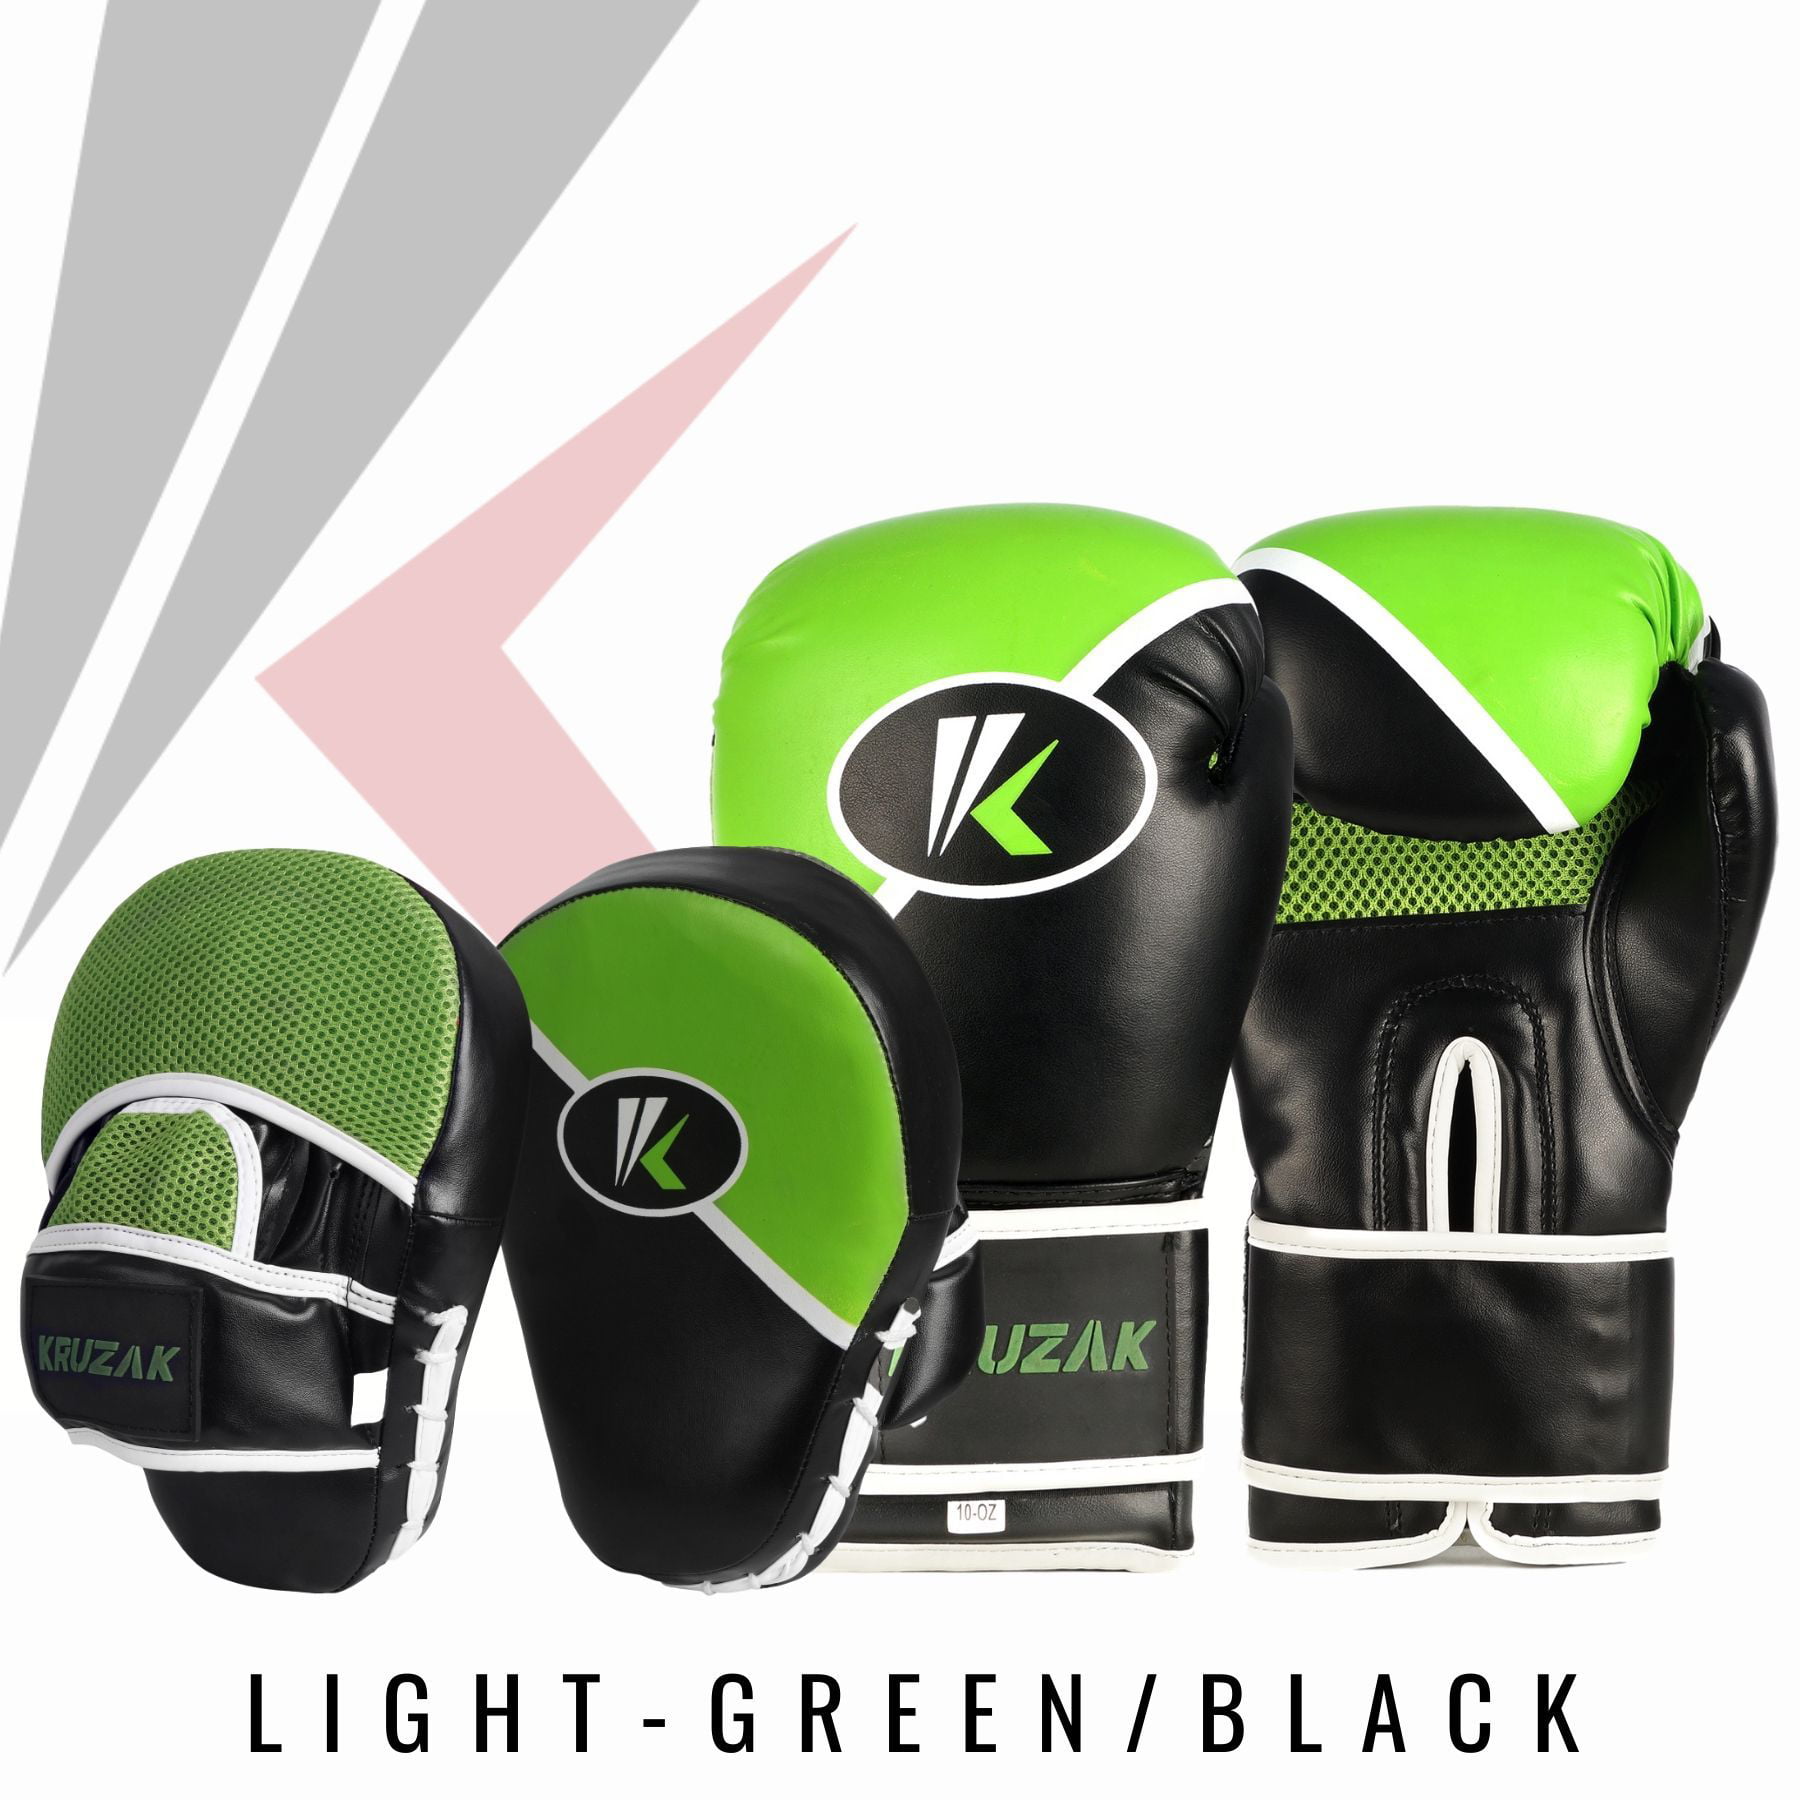 Fitness Kit with Punching Pads for Martial Arts and Karate Kruzak Plain Focus Mitts and Boxing Gloves Set for Kickboxing and Muay Thai MMA Training